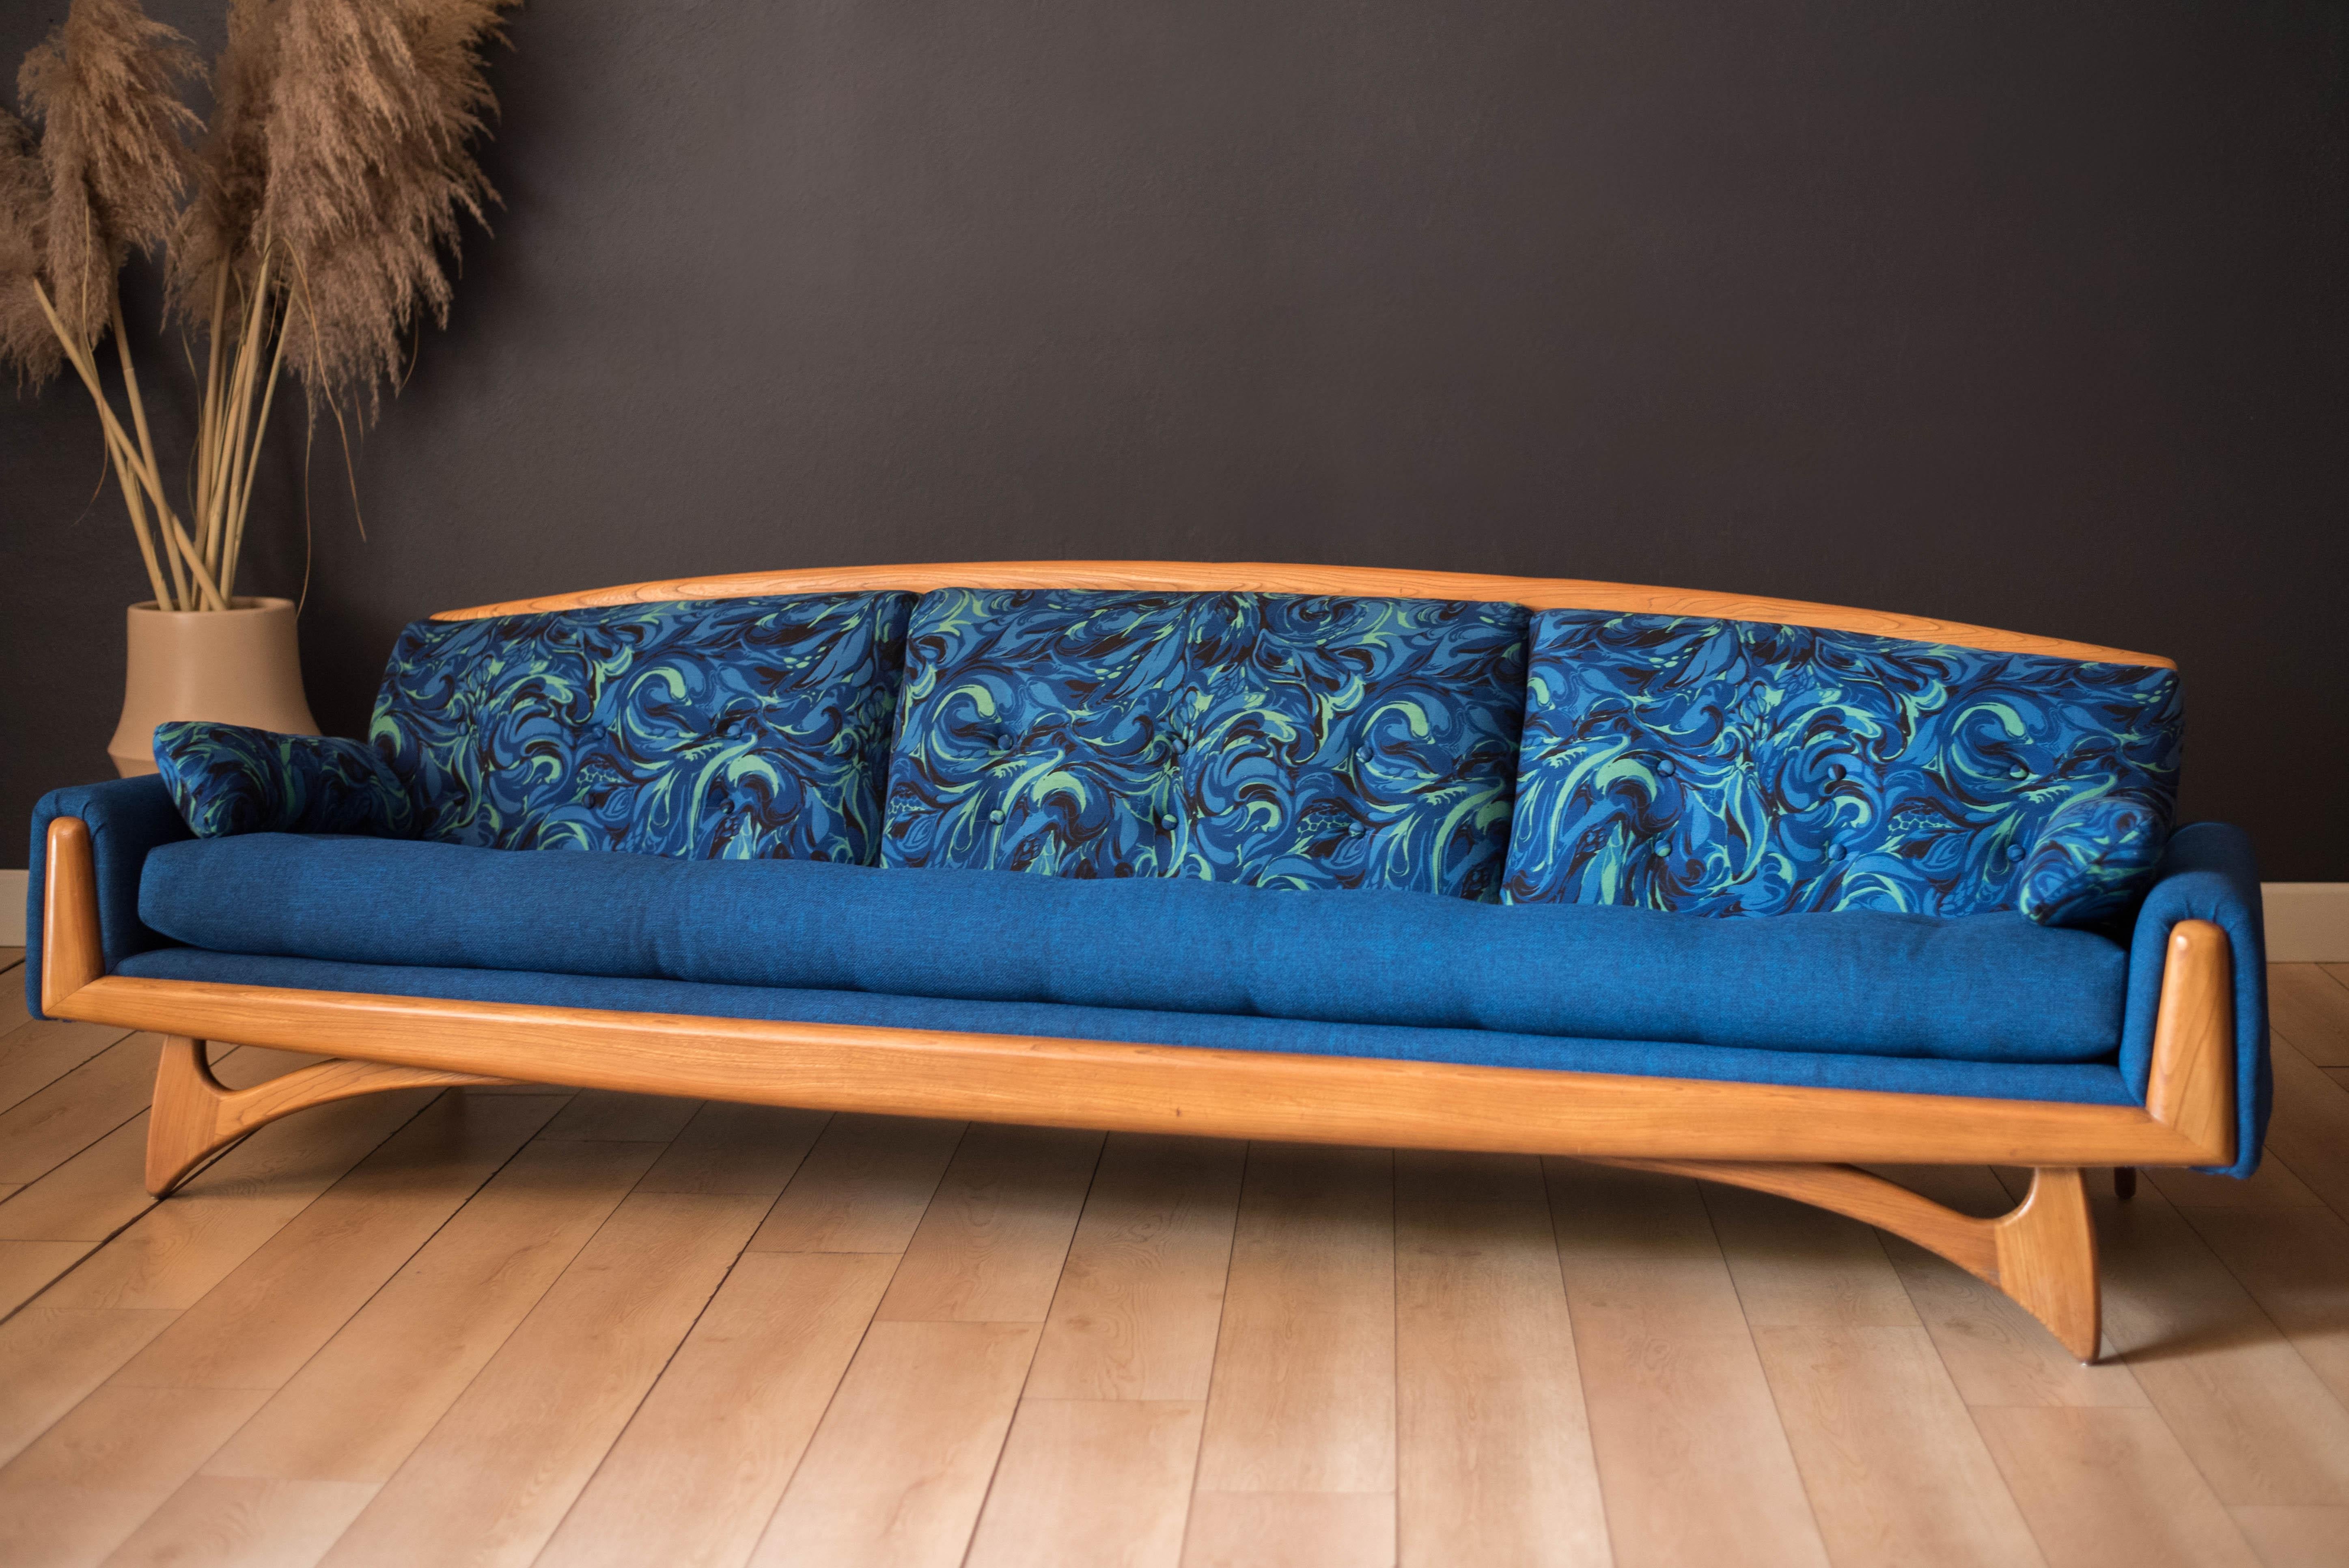 Vintage Sculptural Blue Gondola Sofa manufactured by Kroehler circa 1960's. This standout piece features boomerang legs and classic mid century biscuit tufted cushions. Backrest pillow support is kept original to the piece. 